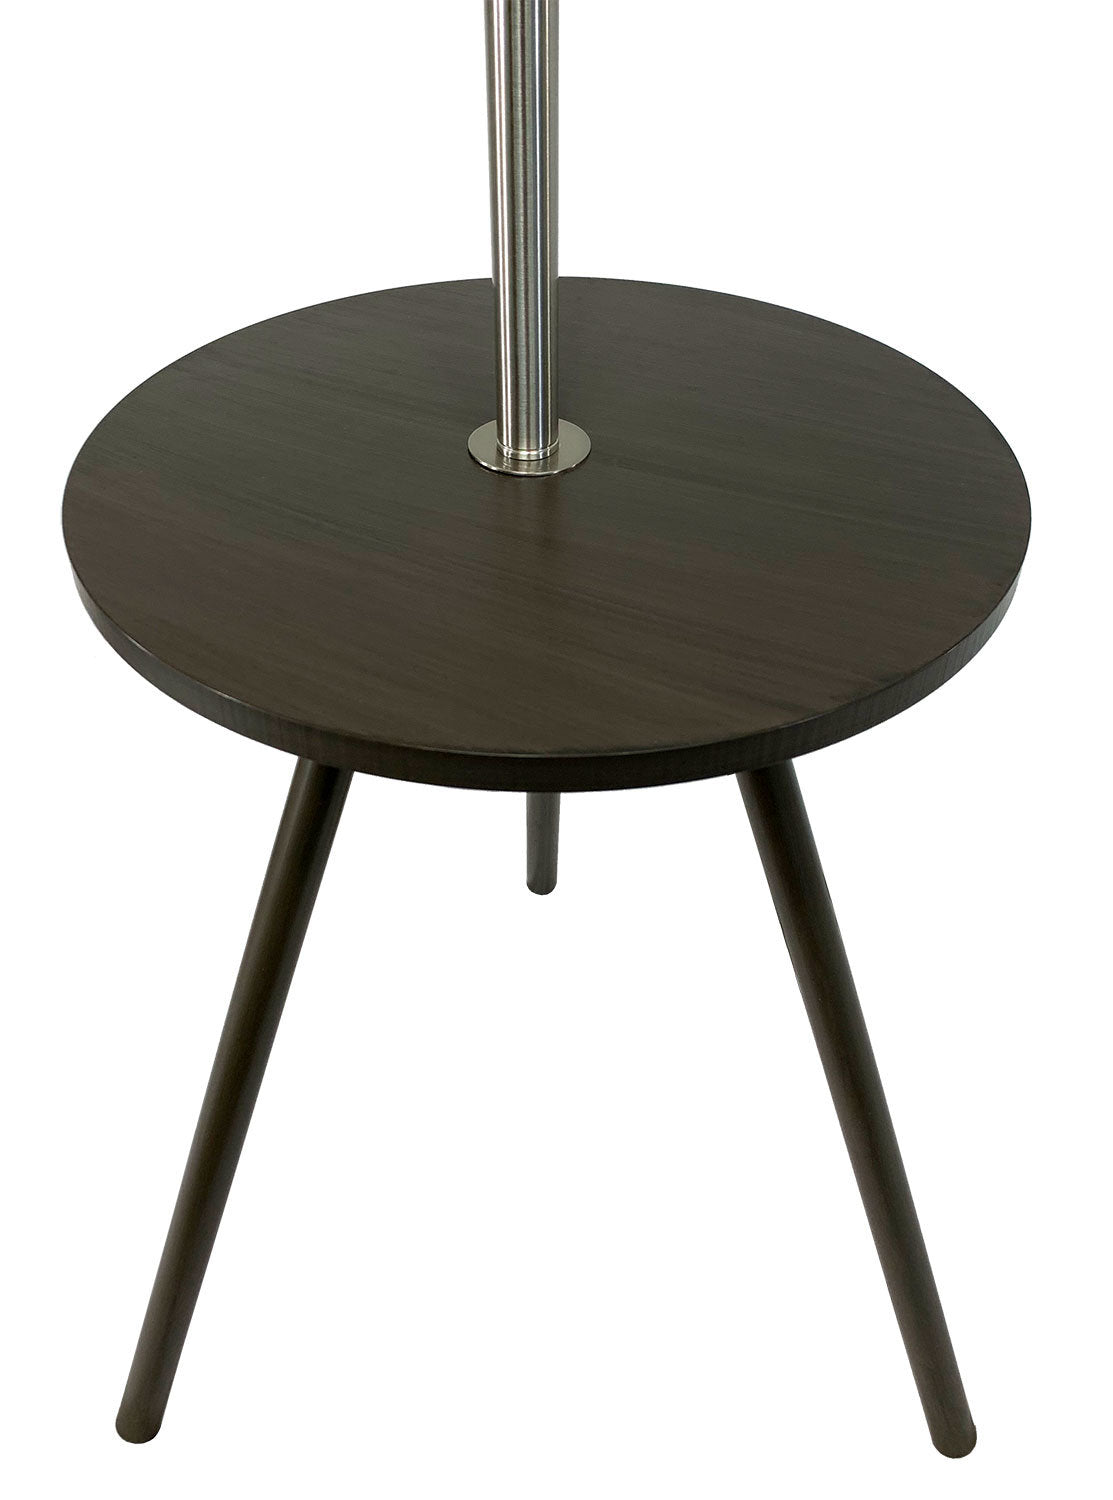 57" Round Sofa Side Table w/ Lamp and Power Station (1.56/9.9)